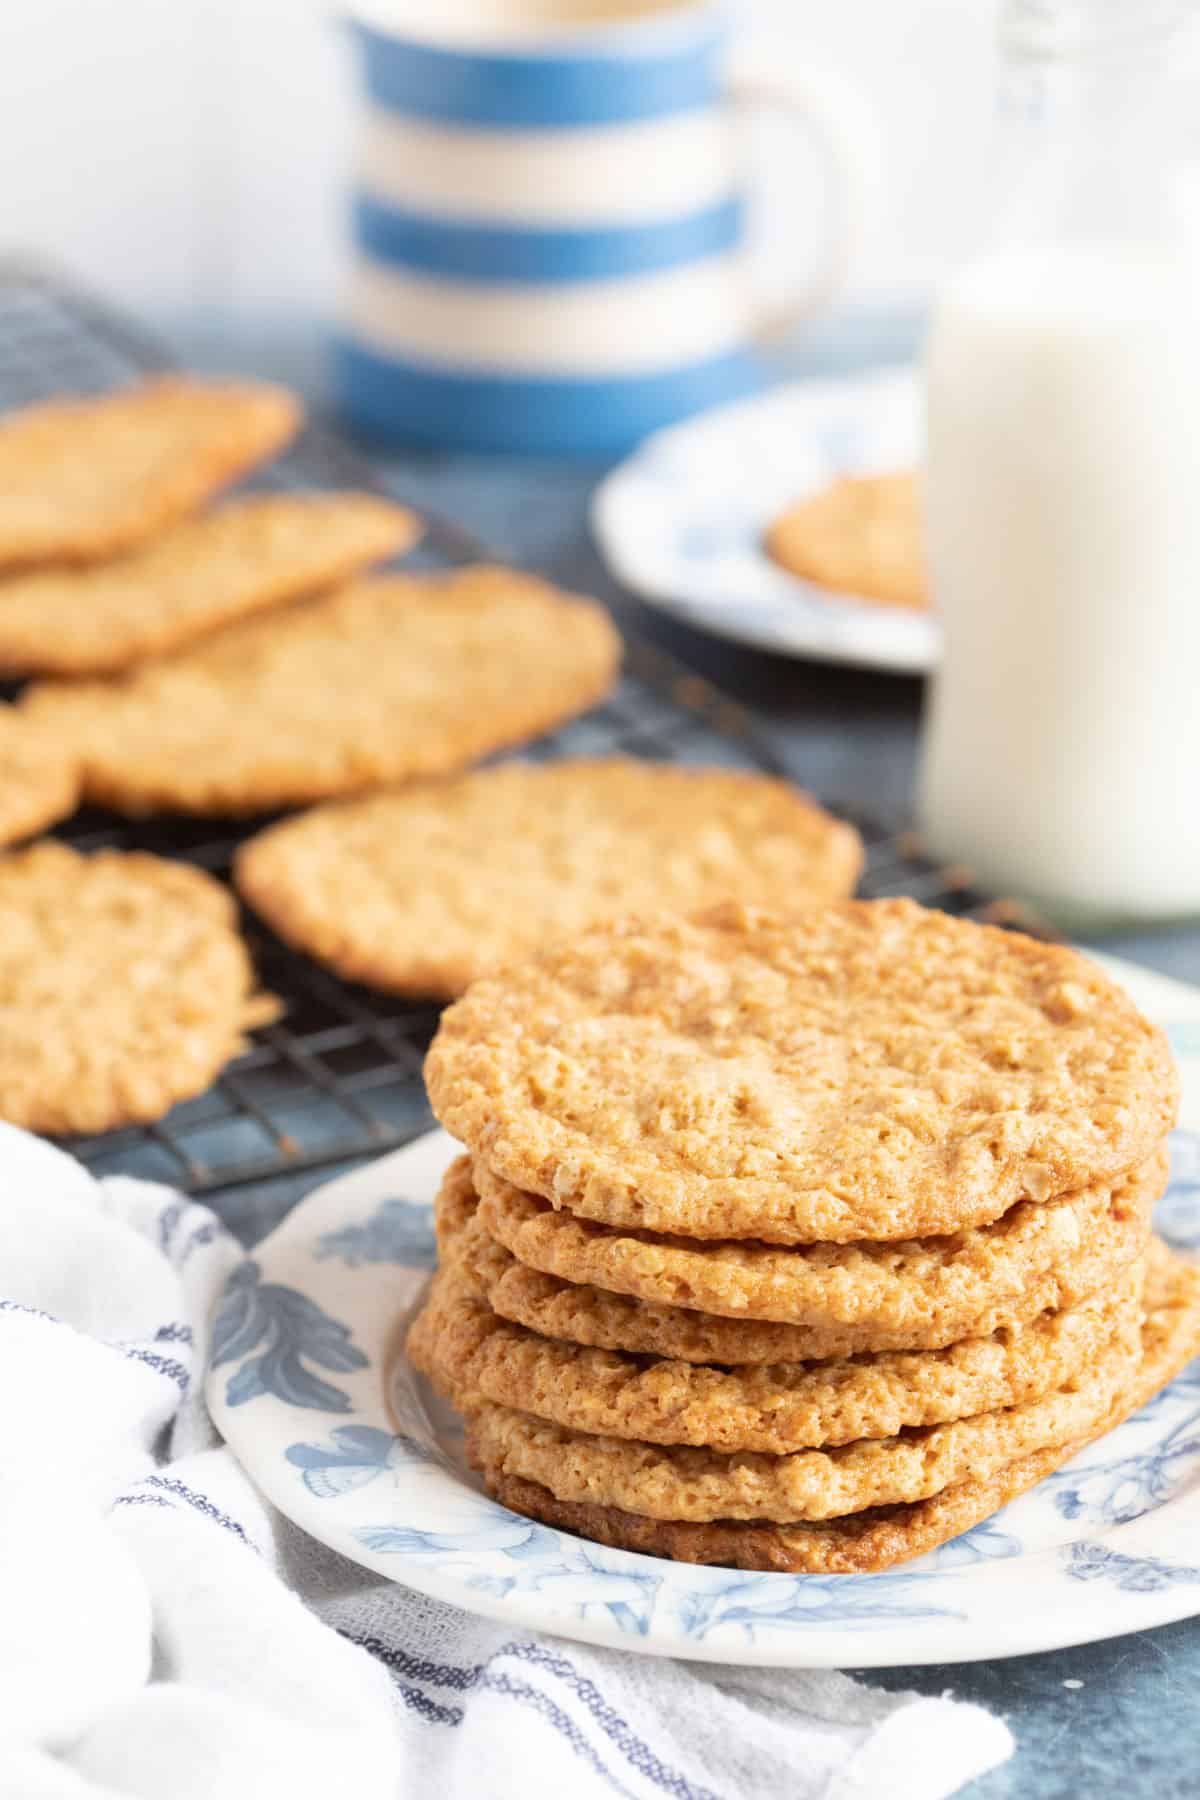 A stack of golden syrup cookies on a plate.